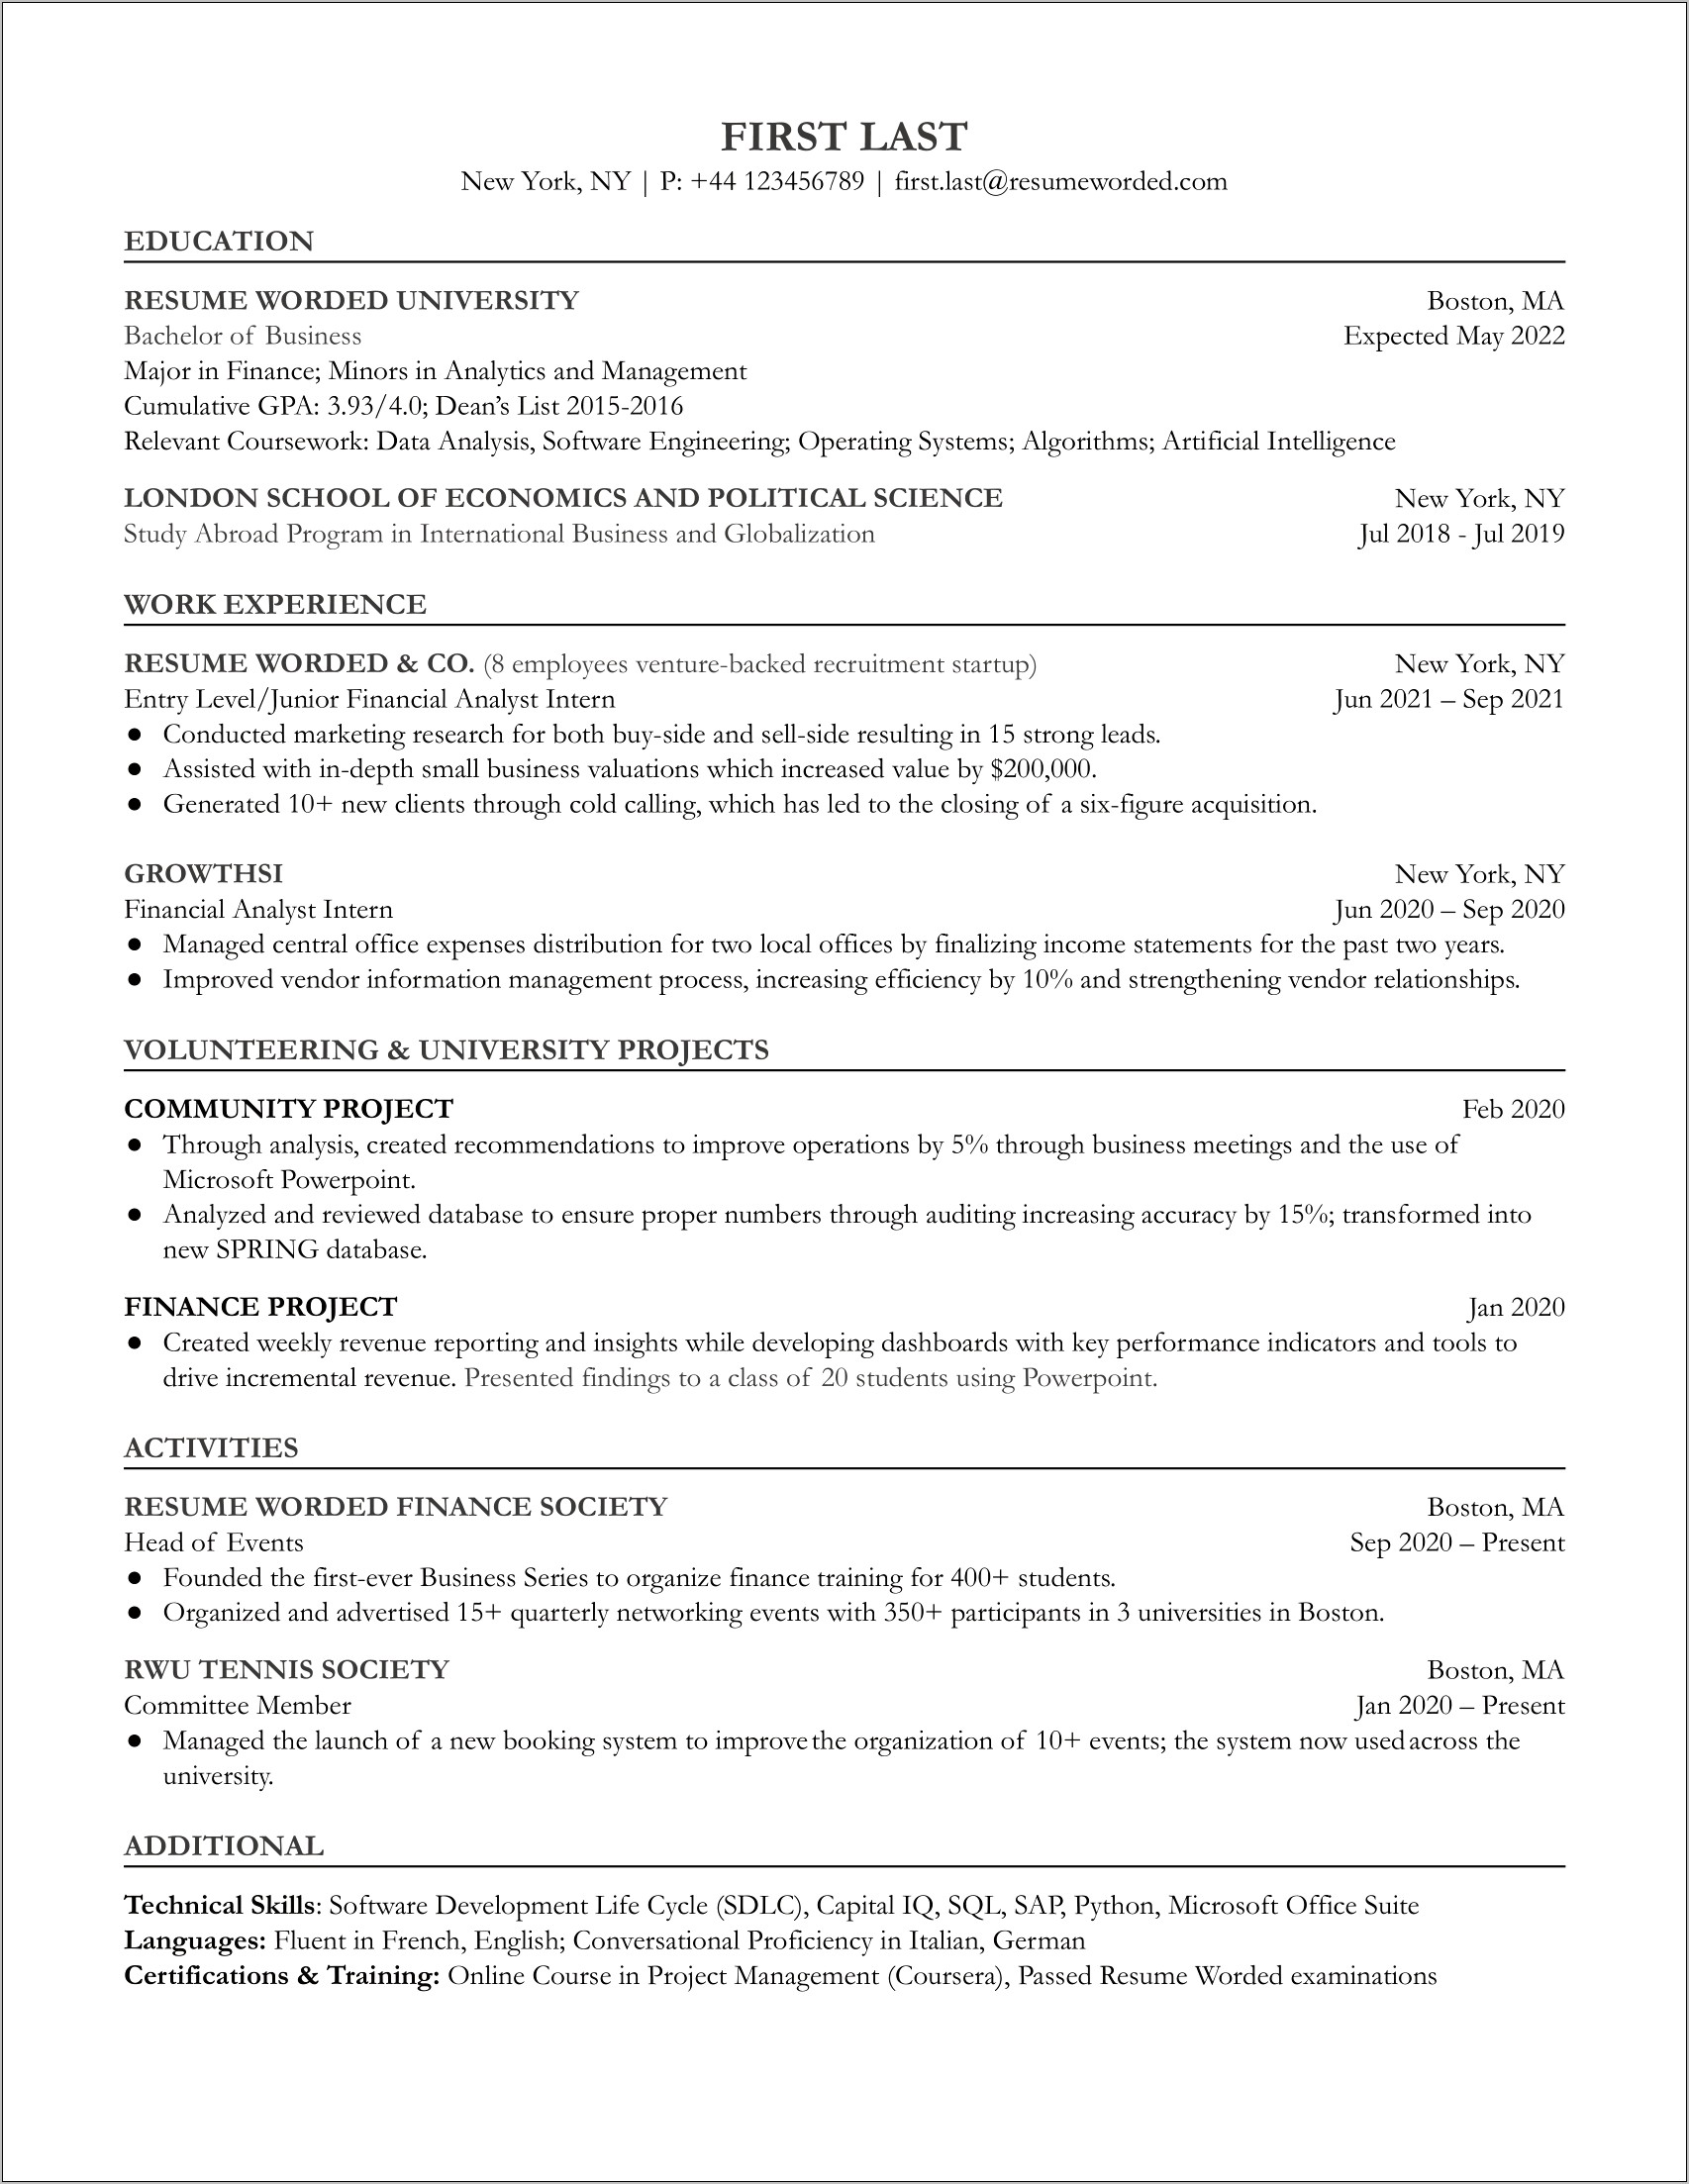 Resume Objective For Entry Level Financial Analyst